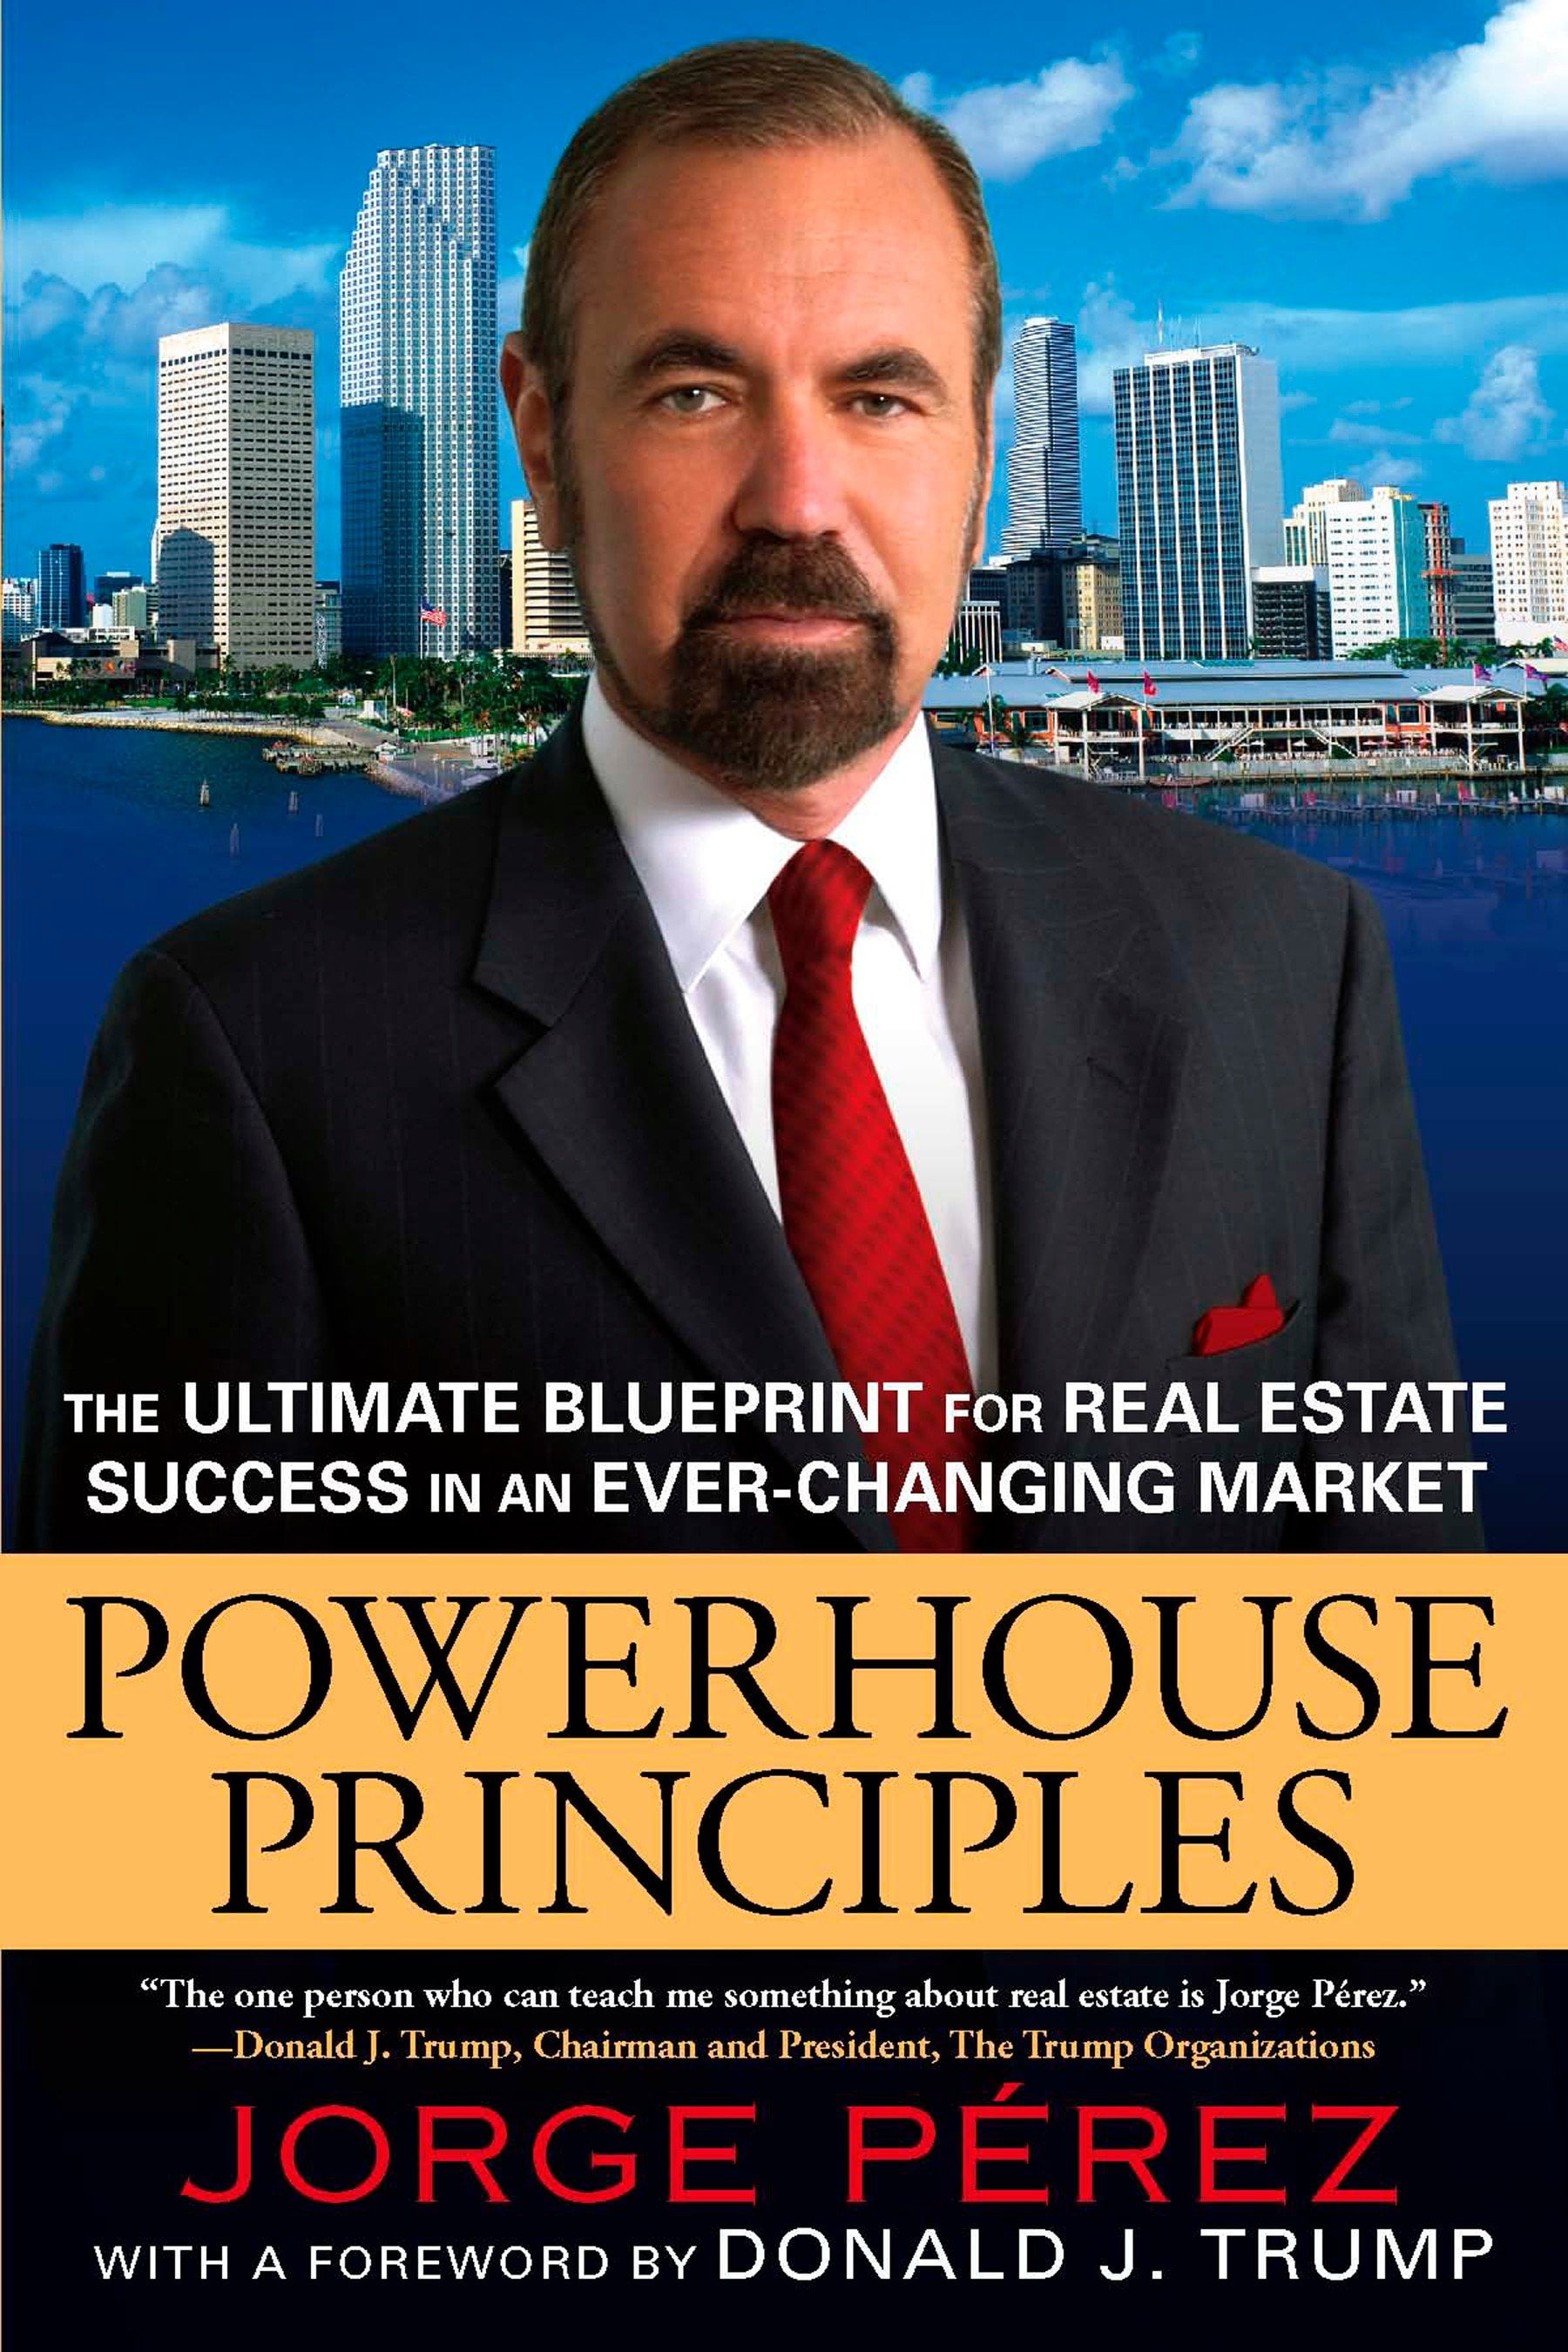 Powerhouse-Principles-The-Ultimate-Blueprint-for-Real-Estate-Success-in-an-EverChanging-Market